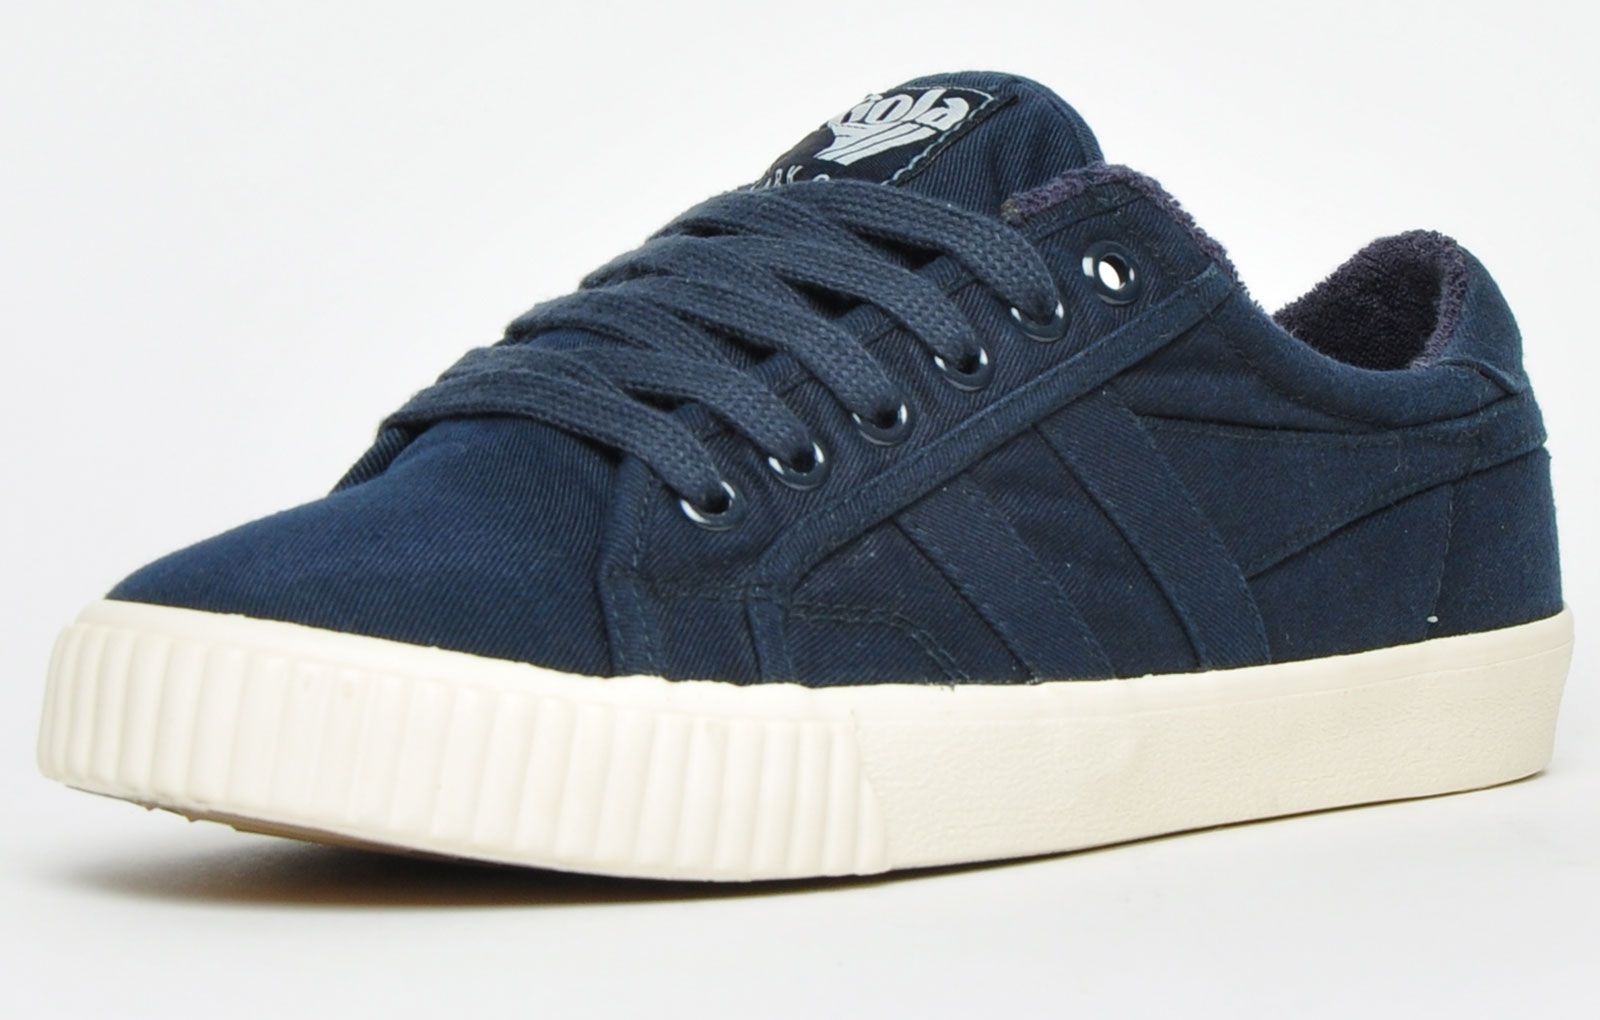 The Gola Classics Tennis Mark Cox Wash is a vegan friendly update of the original Gola Tennis shoe design from 1973. Featuring a canvas textile upper with contrasting Gola branding and a sleek vintage styled sole to give a clean and fresh look. Offering enhanced comfort with a padded soft brushed lining and padded insole, its versatile style can be teamed with a variety of looks to add a relaxed touch to any outfit. <p>- Retro style</p> <p>- Vegan Friendly</p> <p>- Soft lining for additional comfort</p> <p> - Premium canvas textile upper</p> <p>- Lace-up closure</p> <p>- Gola Classics branding throughout</p>